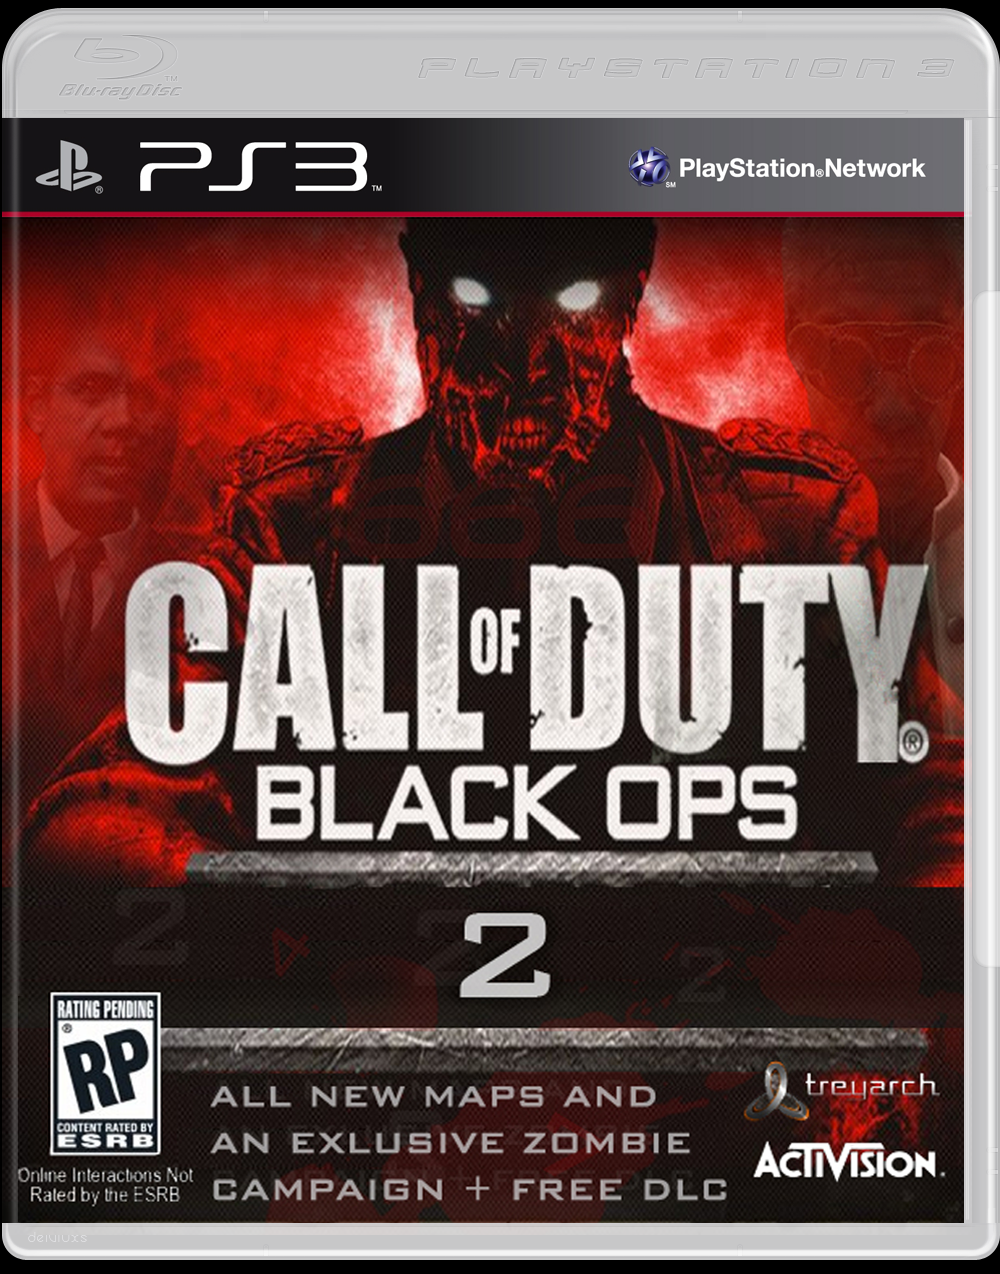 Black Ops 2 box cover